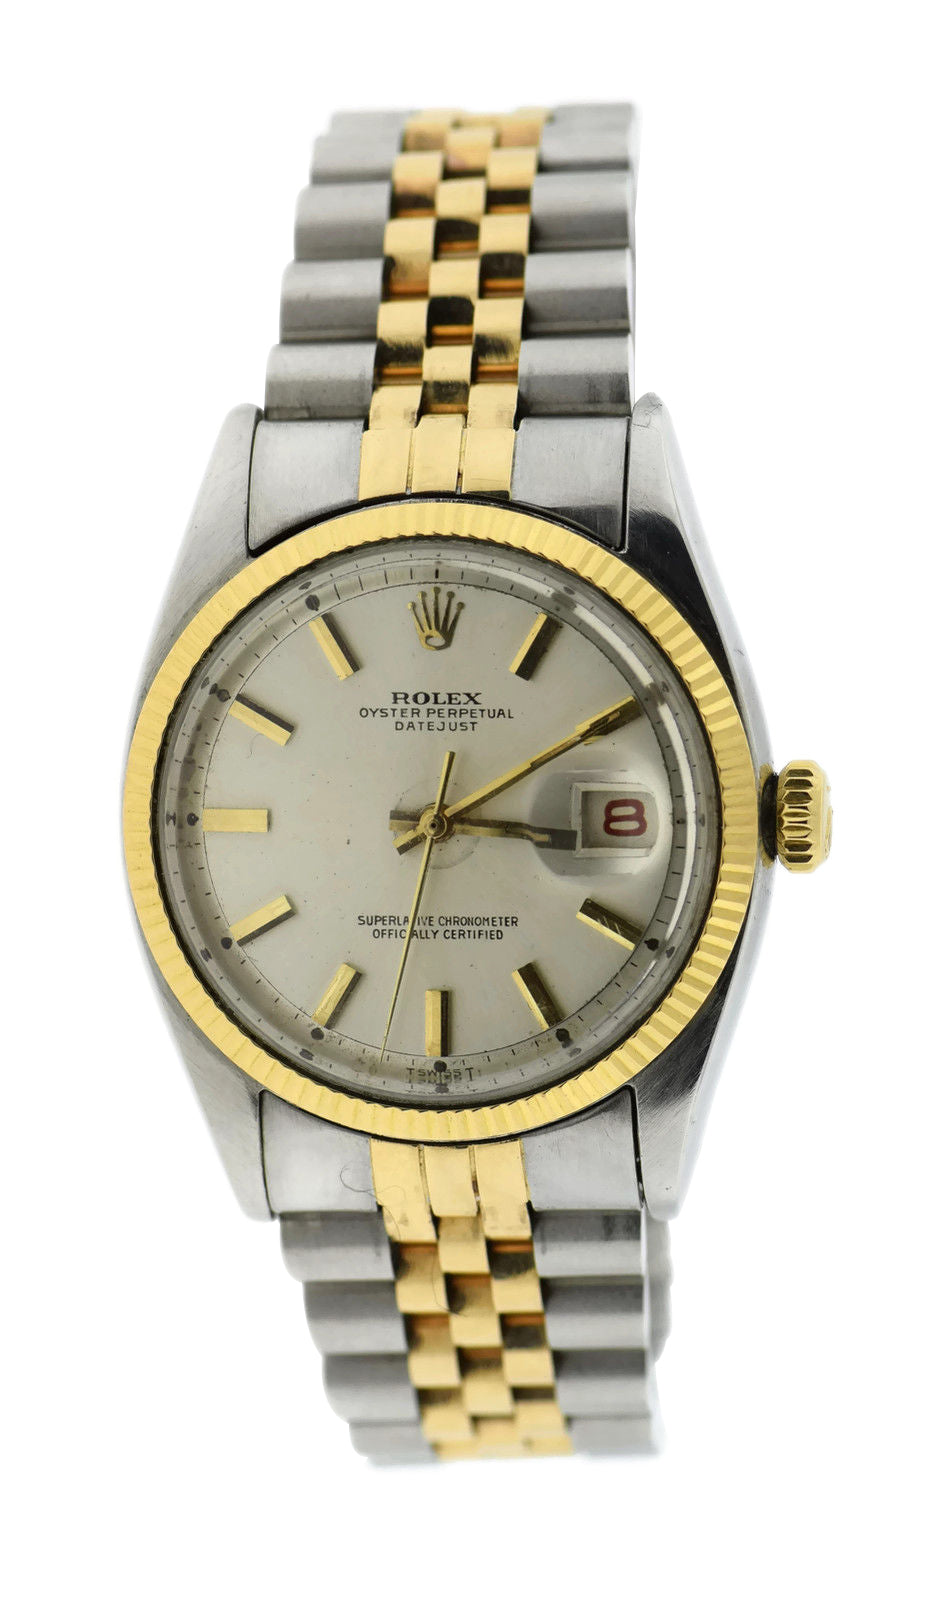 Rolex Oyster Perpetual Datejust 6105 4